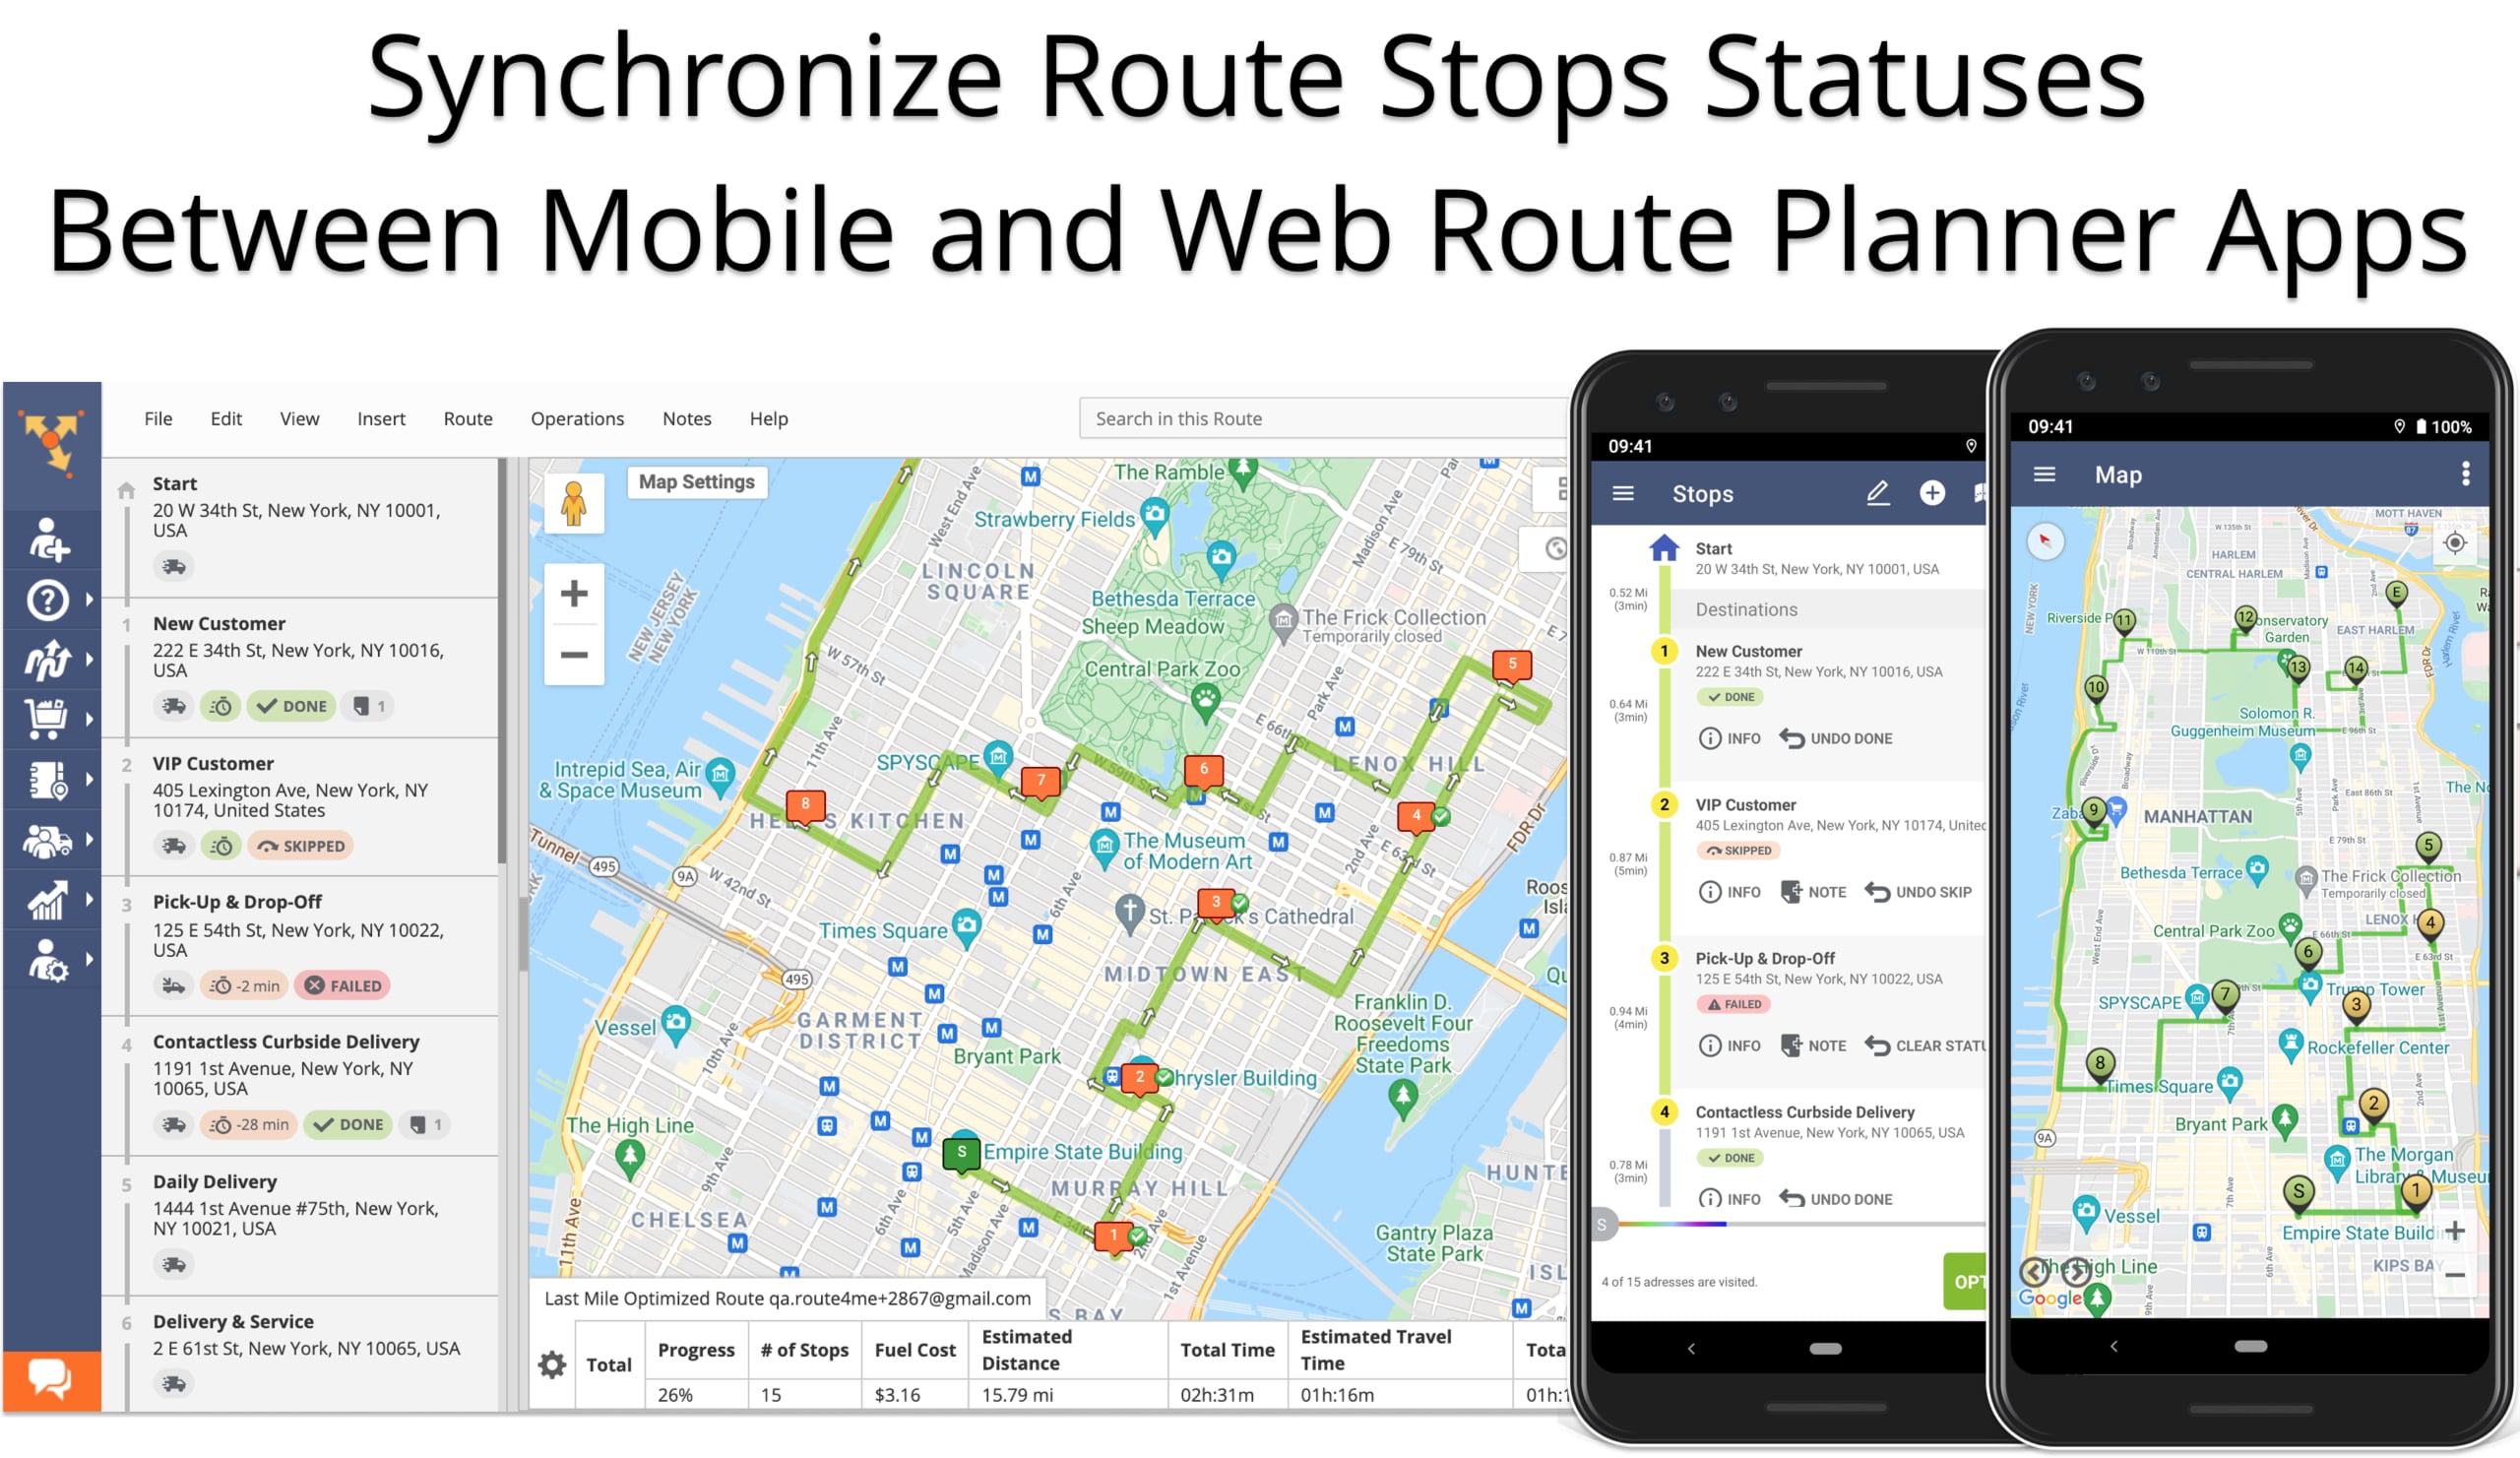 Synchronize route stops statuses from the Android Route Planner app with the Web Platform.